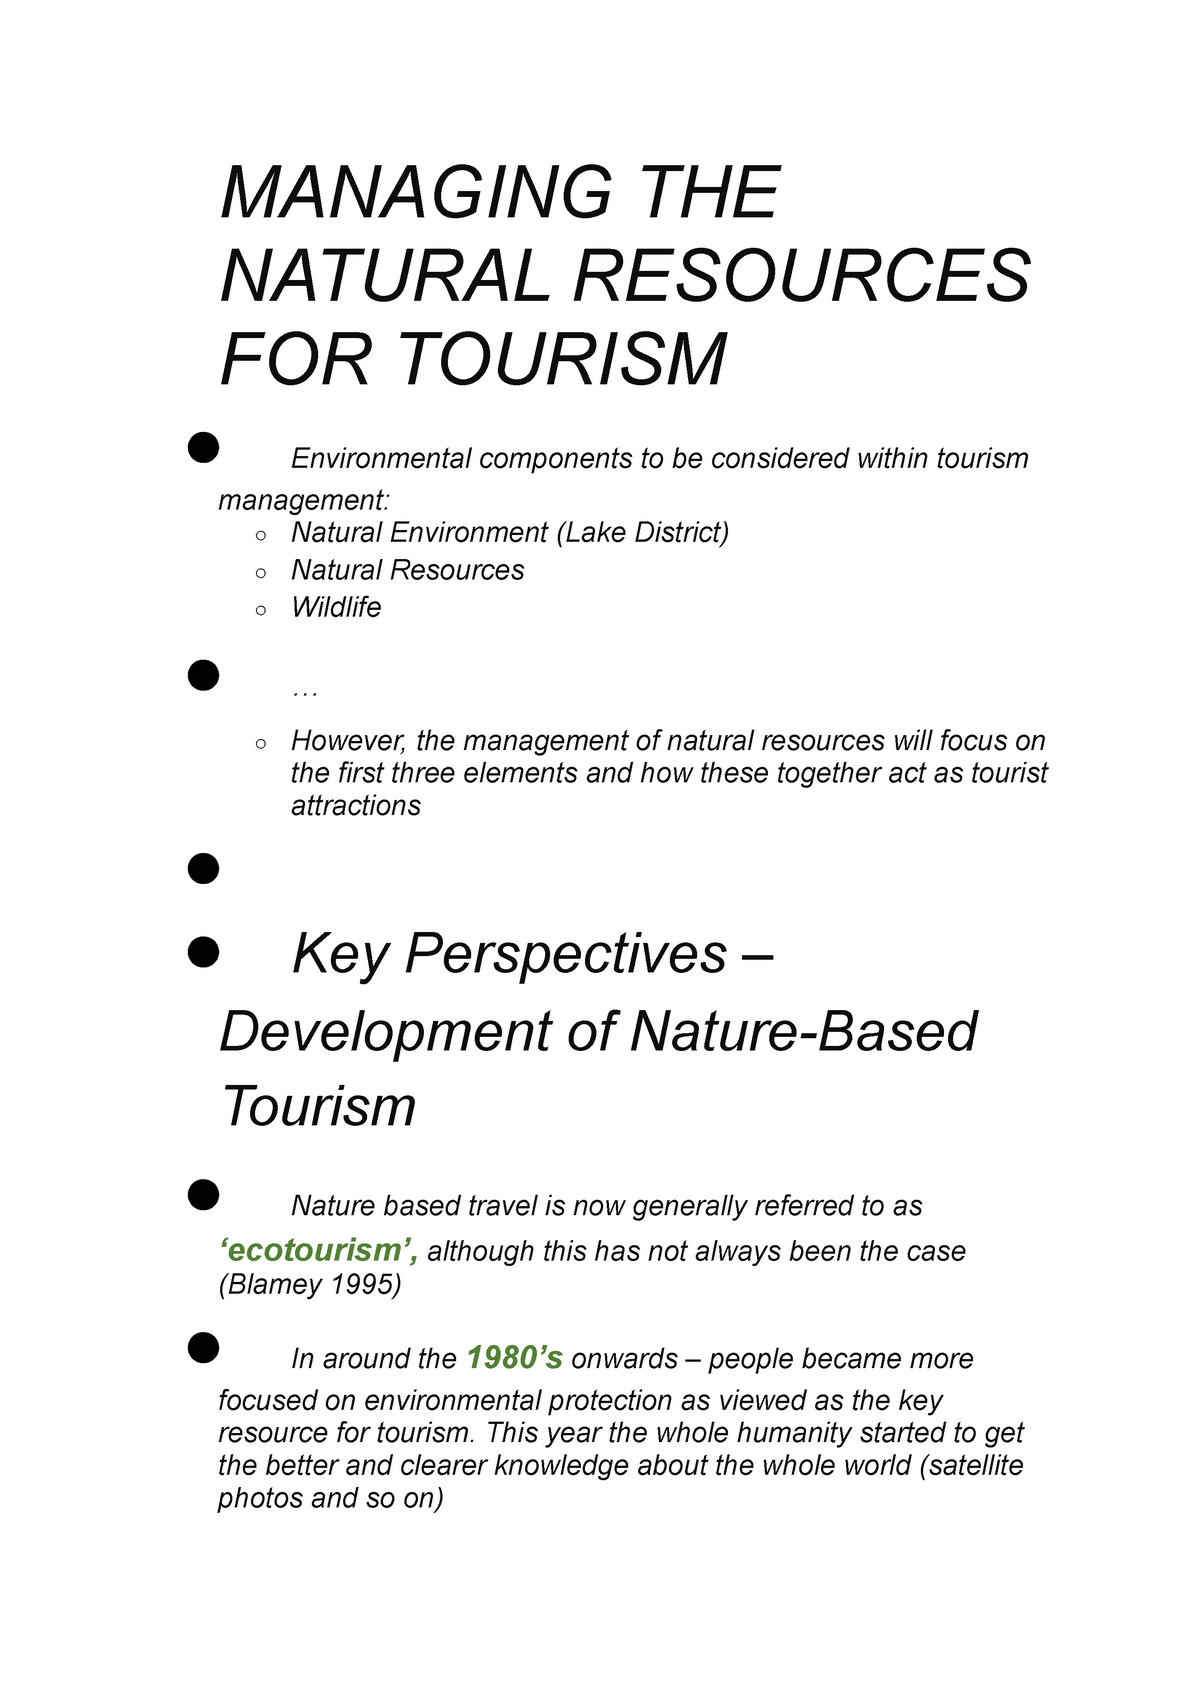 in the tourism business natural resources are intensively